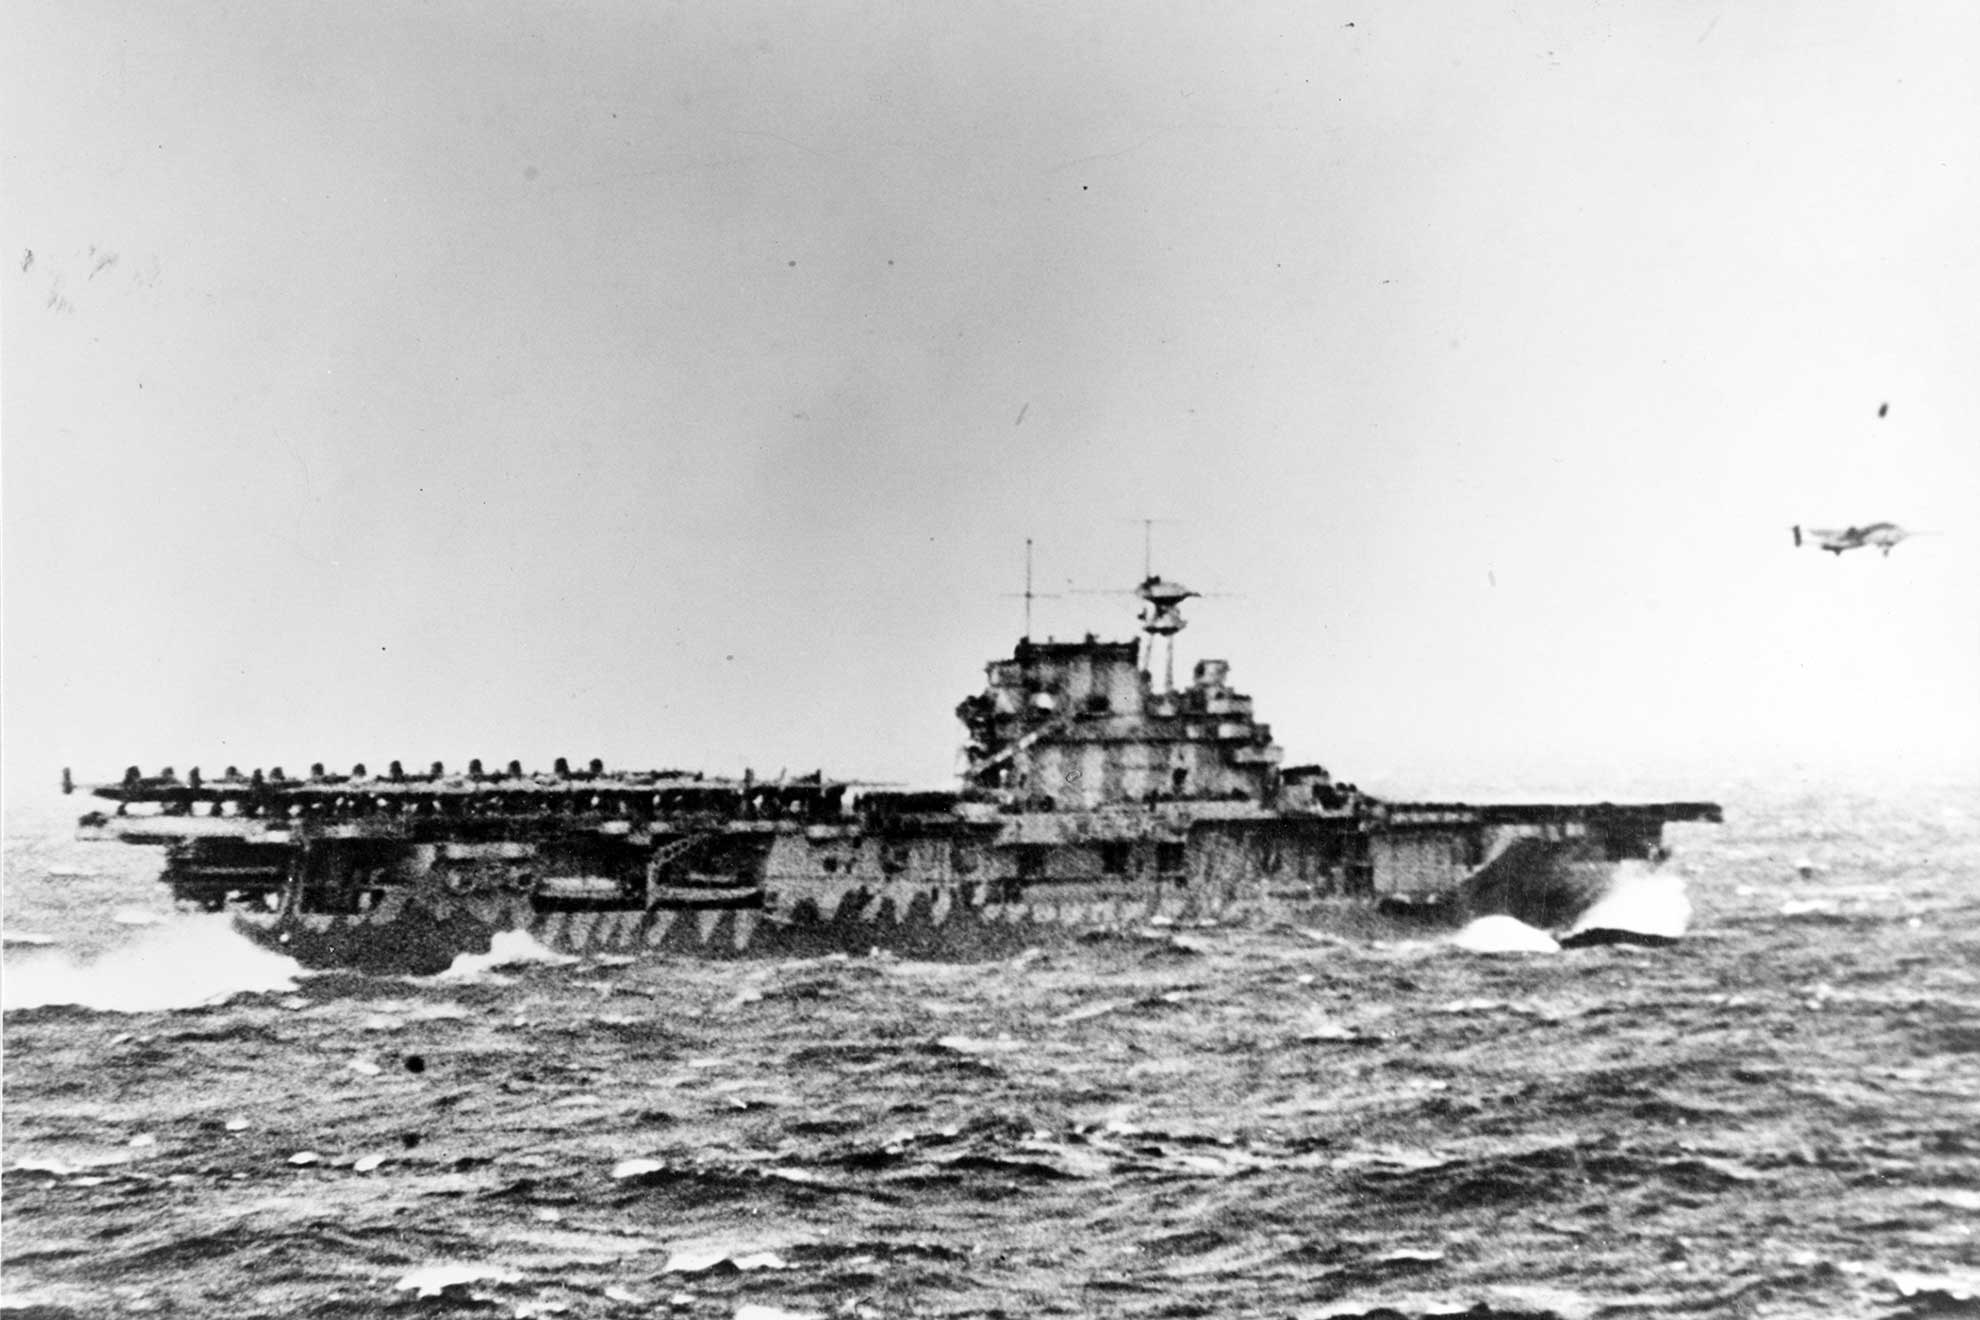 Washington D.C. (Feb. 12, 2019) A file photo taken April 18, 1942 of the aircraft carrier USS Hornet (CV 8) launching U.S. Army Air Forces B-25B bombers at the start of the Doolittle Raid, the first U.S. air raid on the Japanese home islands -- U.S. Navy photo. -